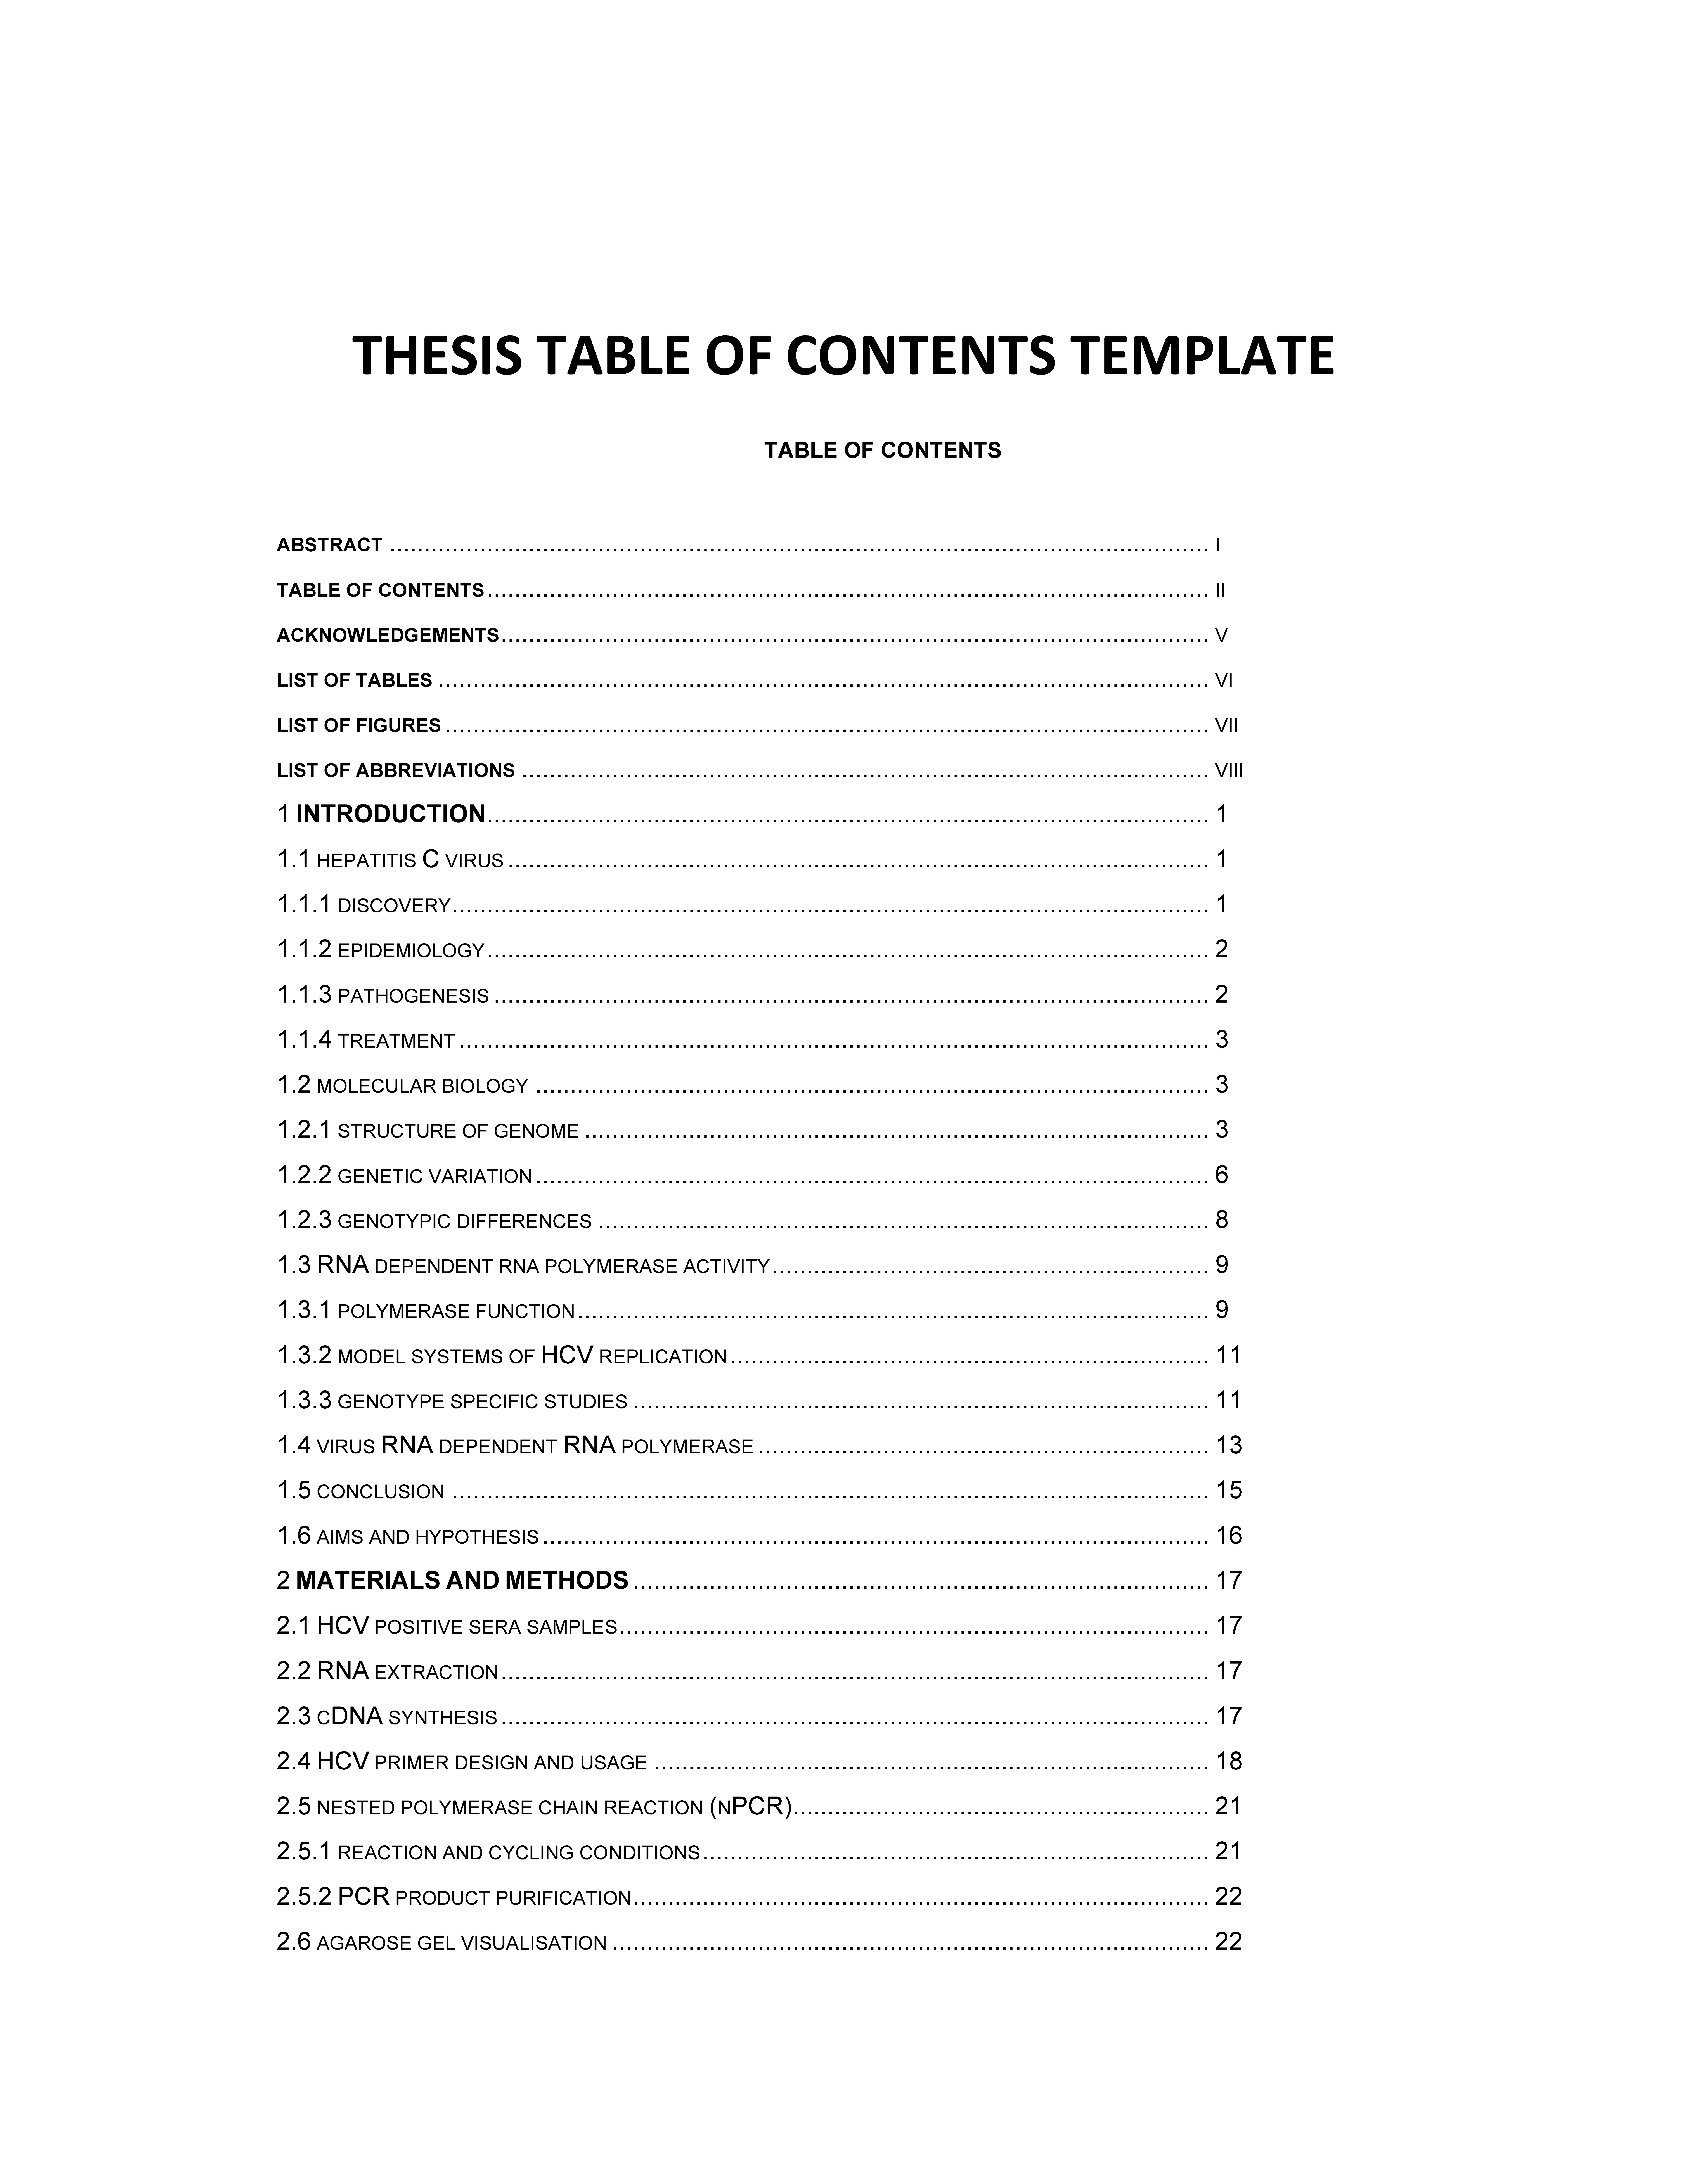 Research Table of Contents Template main image